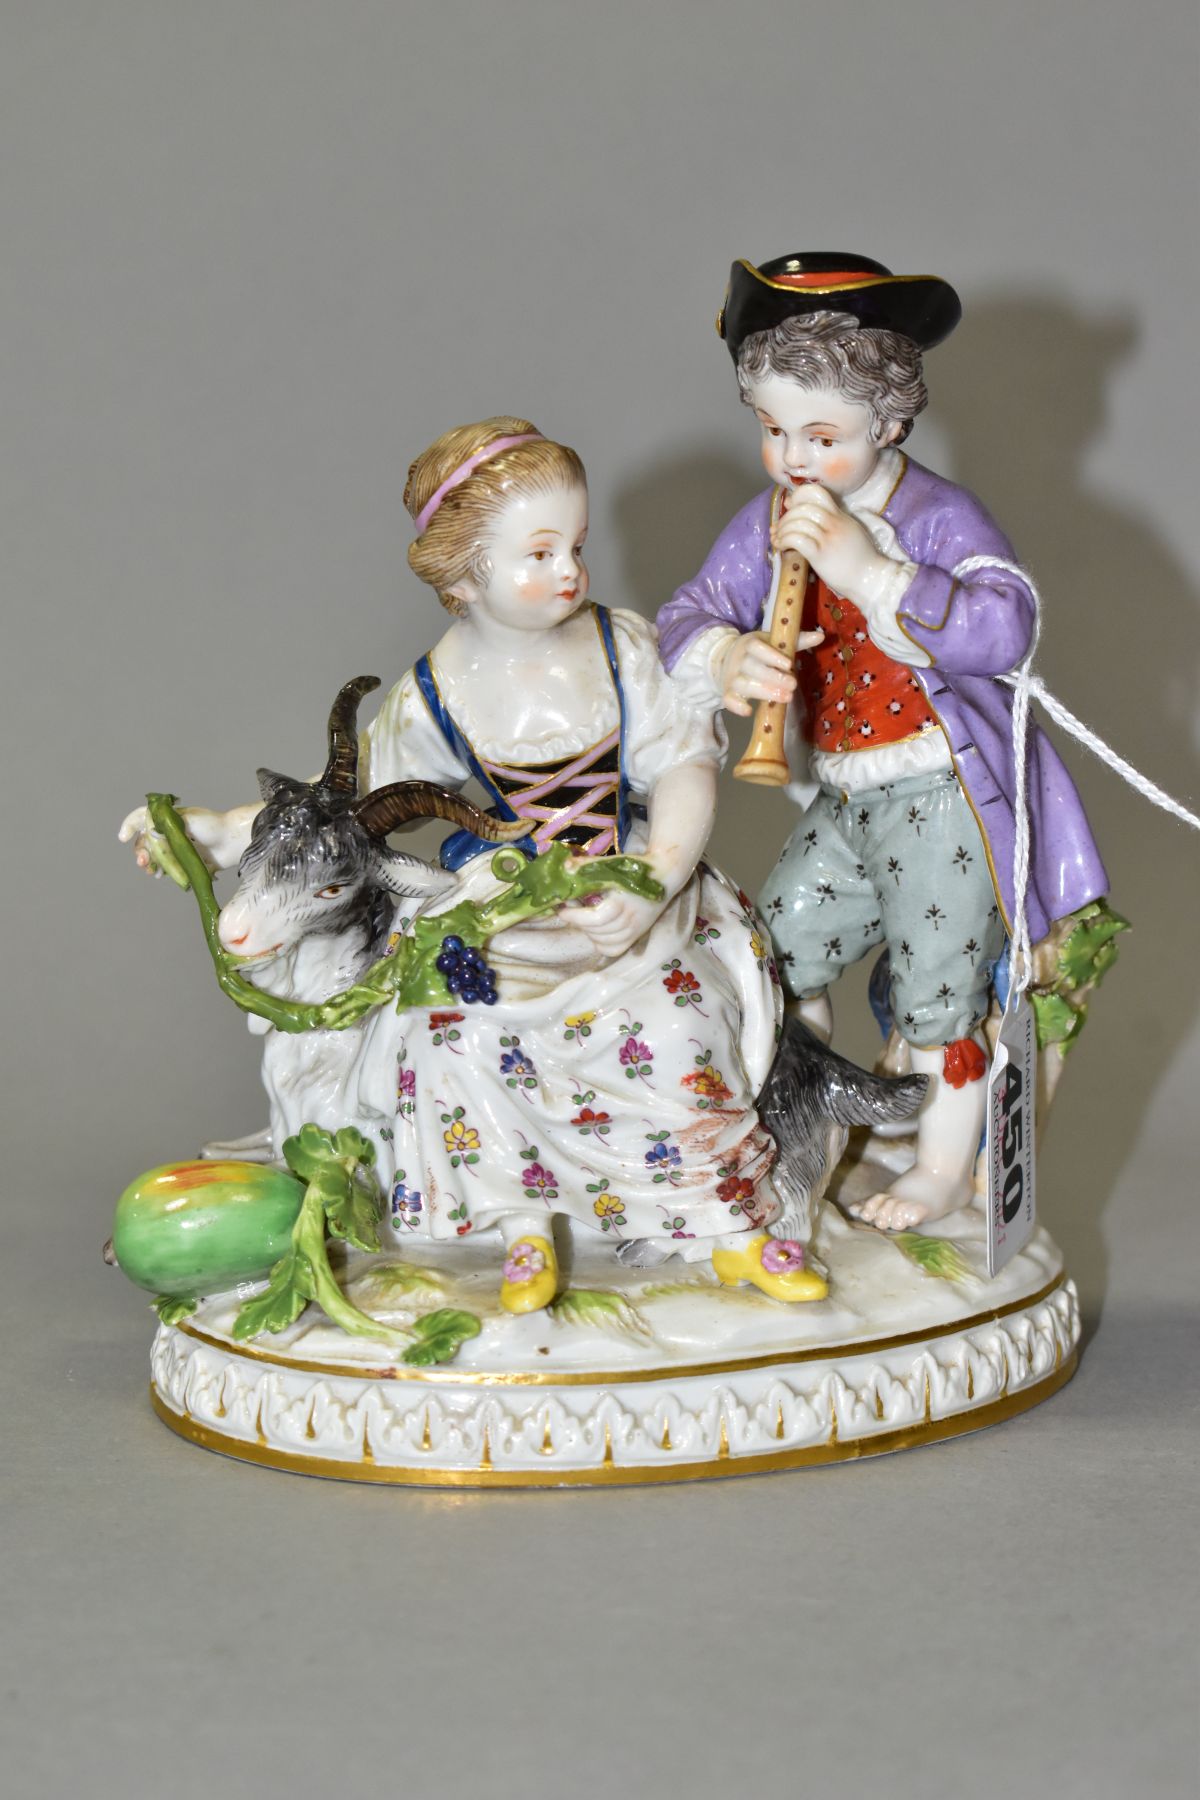 A LATE 19TH CENTURY MEISSEN FIGURE GROUP OF A BOY AND A GIRL WITH A GOAT, the boy playing a wind